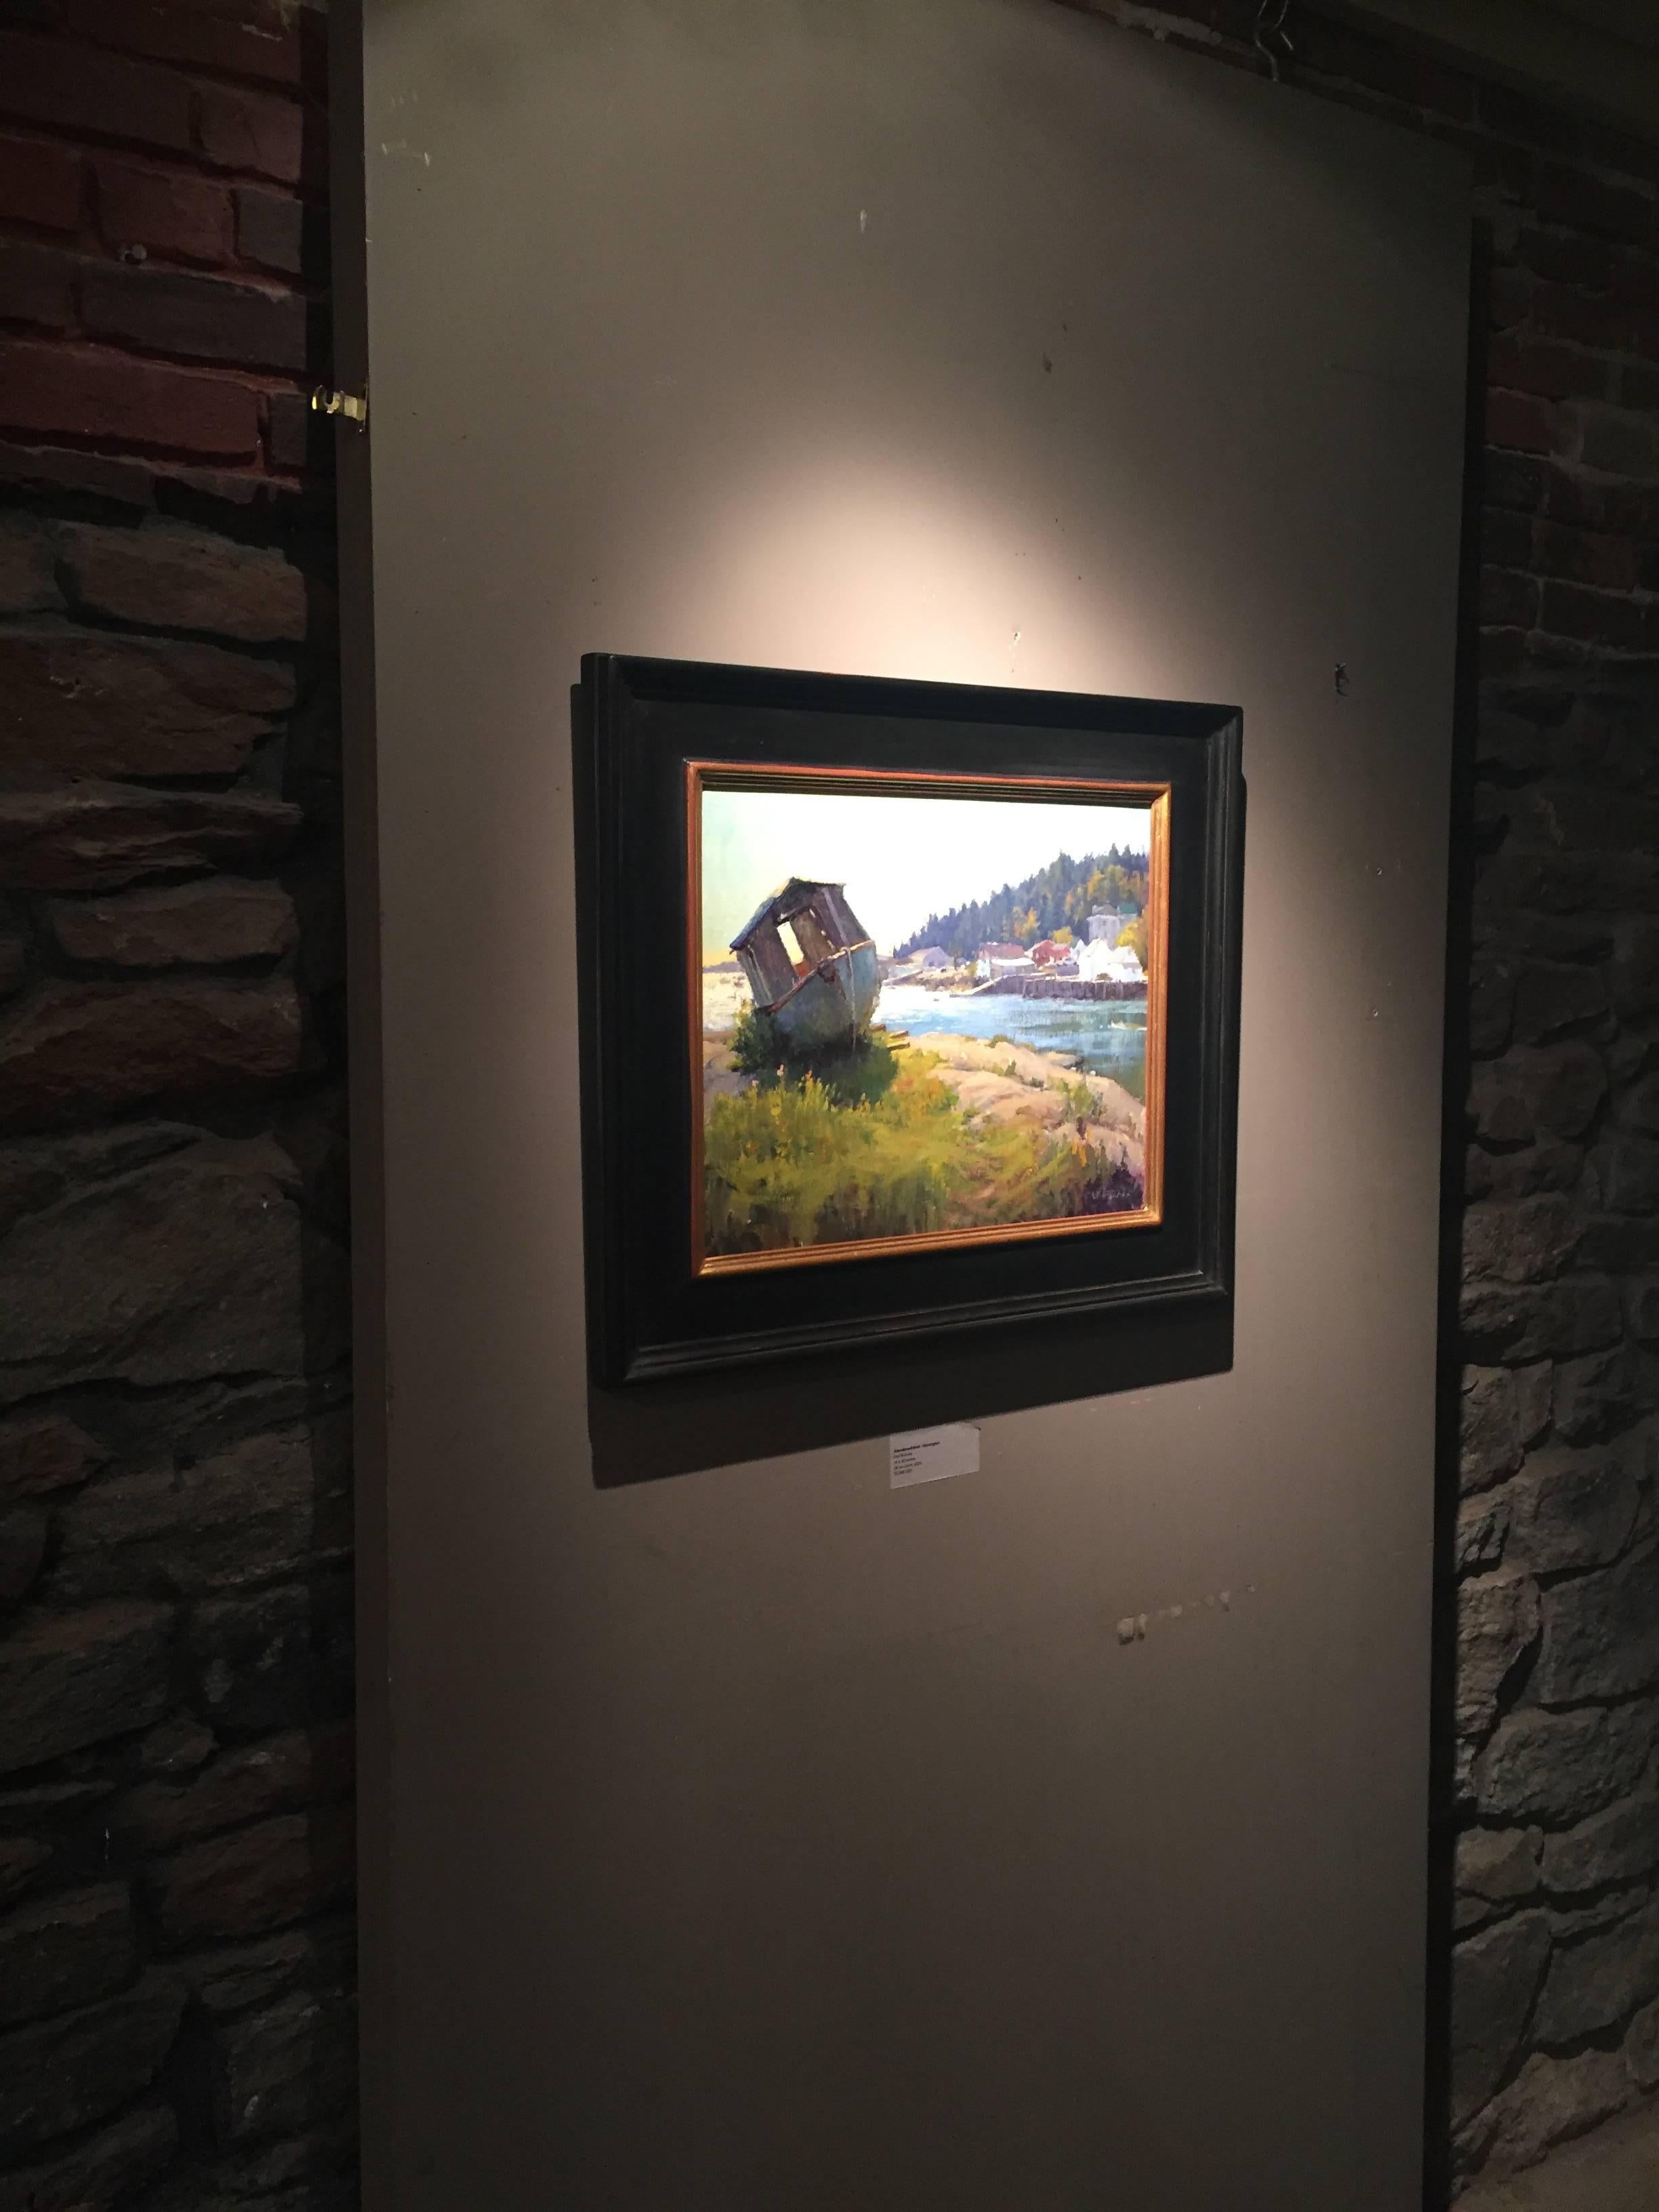 Carl Bretzke is a representational painter who specializes in urban scenes and plein-aire landscapes. Carl's work has been exhibited extensively in Minnesota and California, including the Minneapolis Institute of Art. 

Carl holds an MD degree from